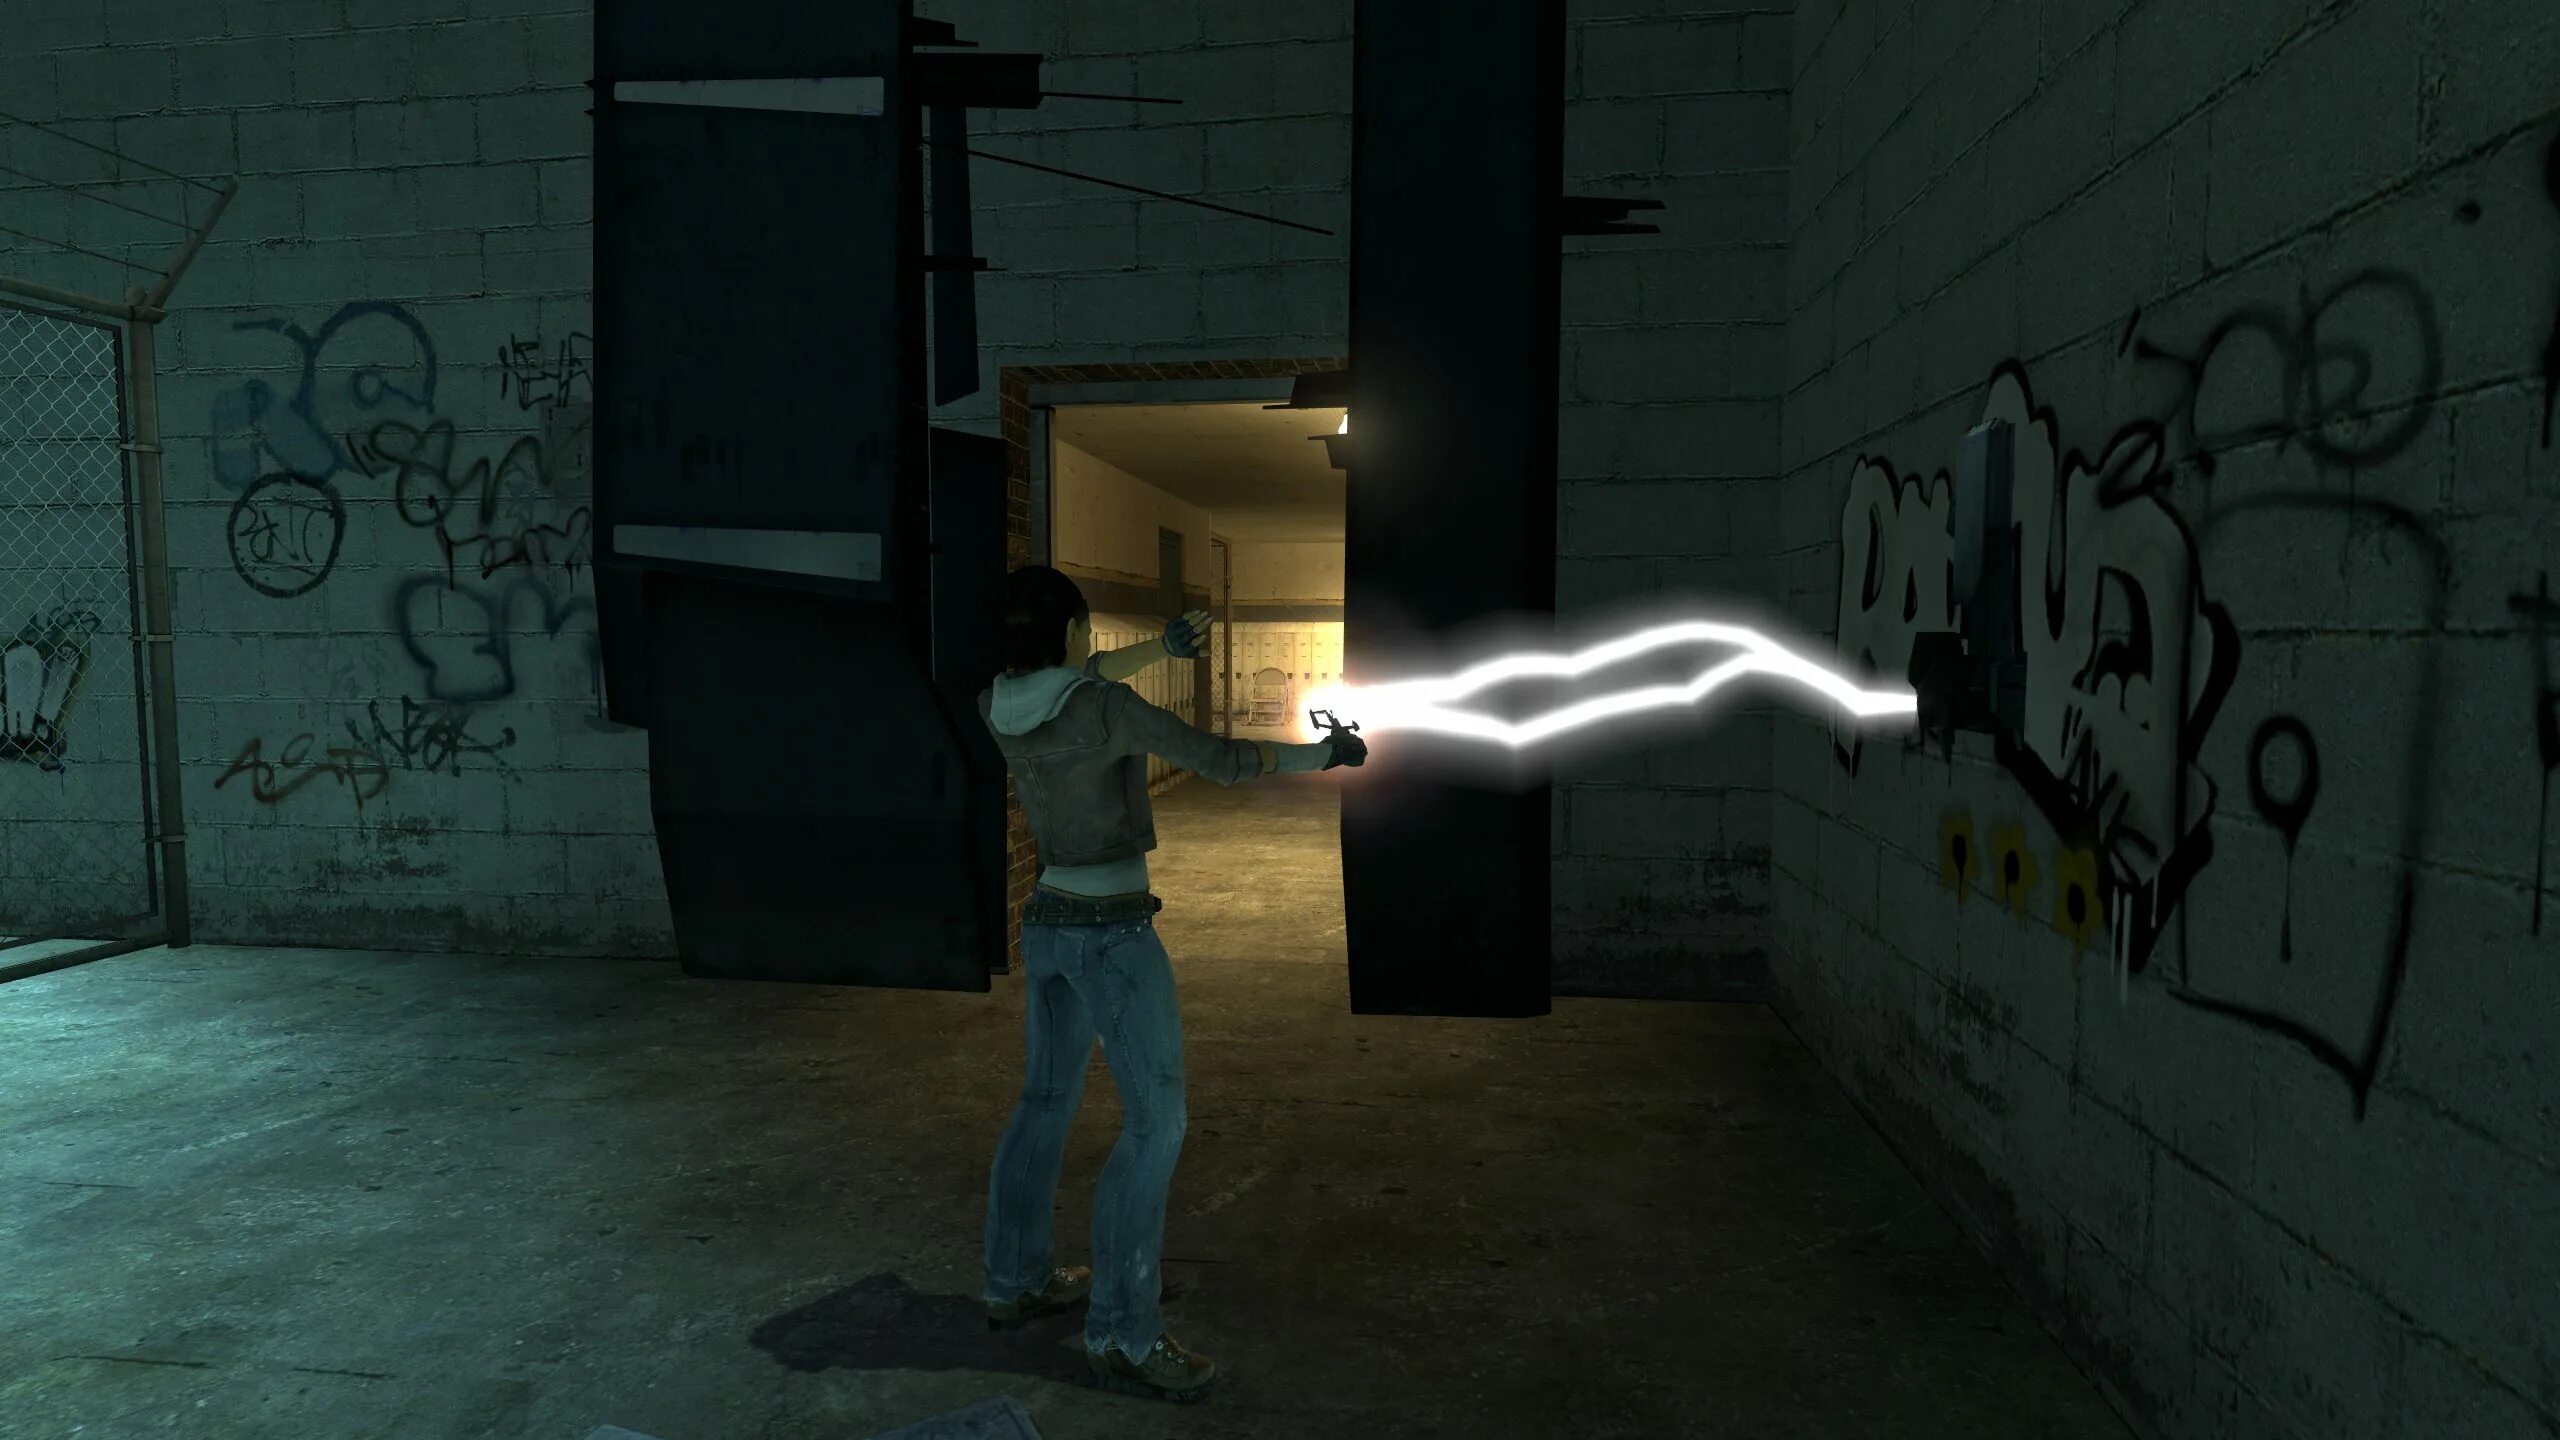 Exit from игра. Exit from Скриншоты. Exit from [other s]. Half-Life 2: Episode one - 05 - exit 17 [hard]. Exit 1 game